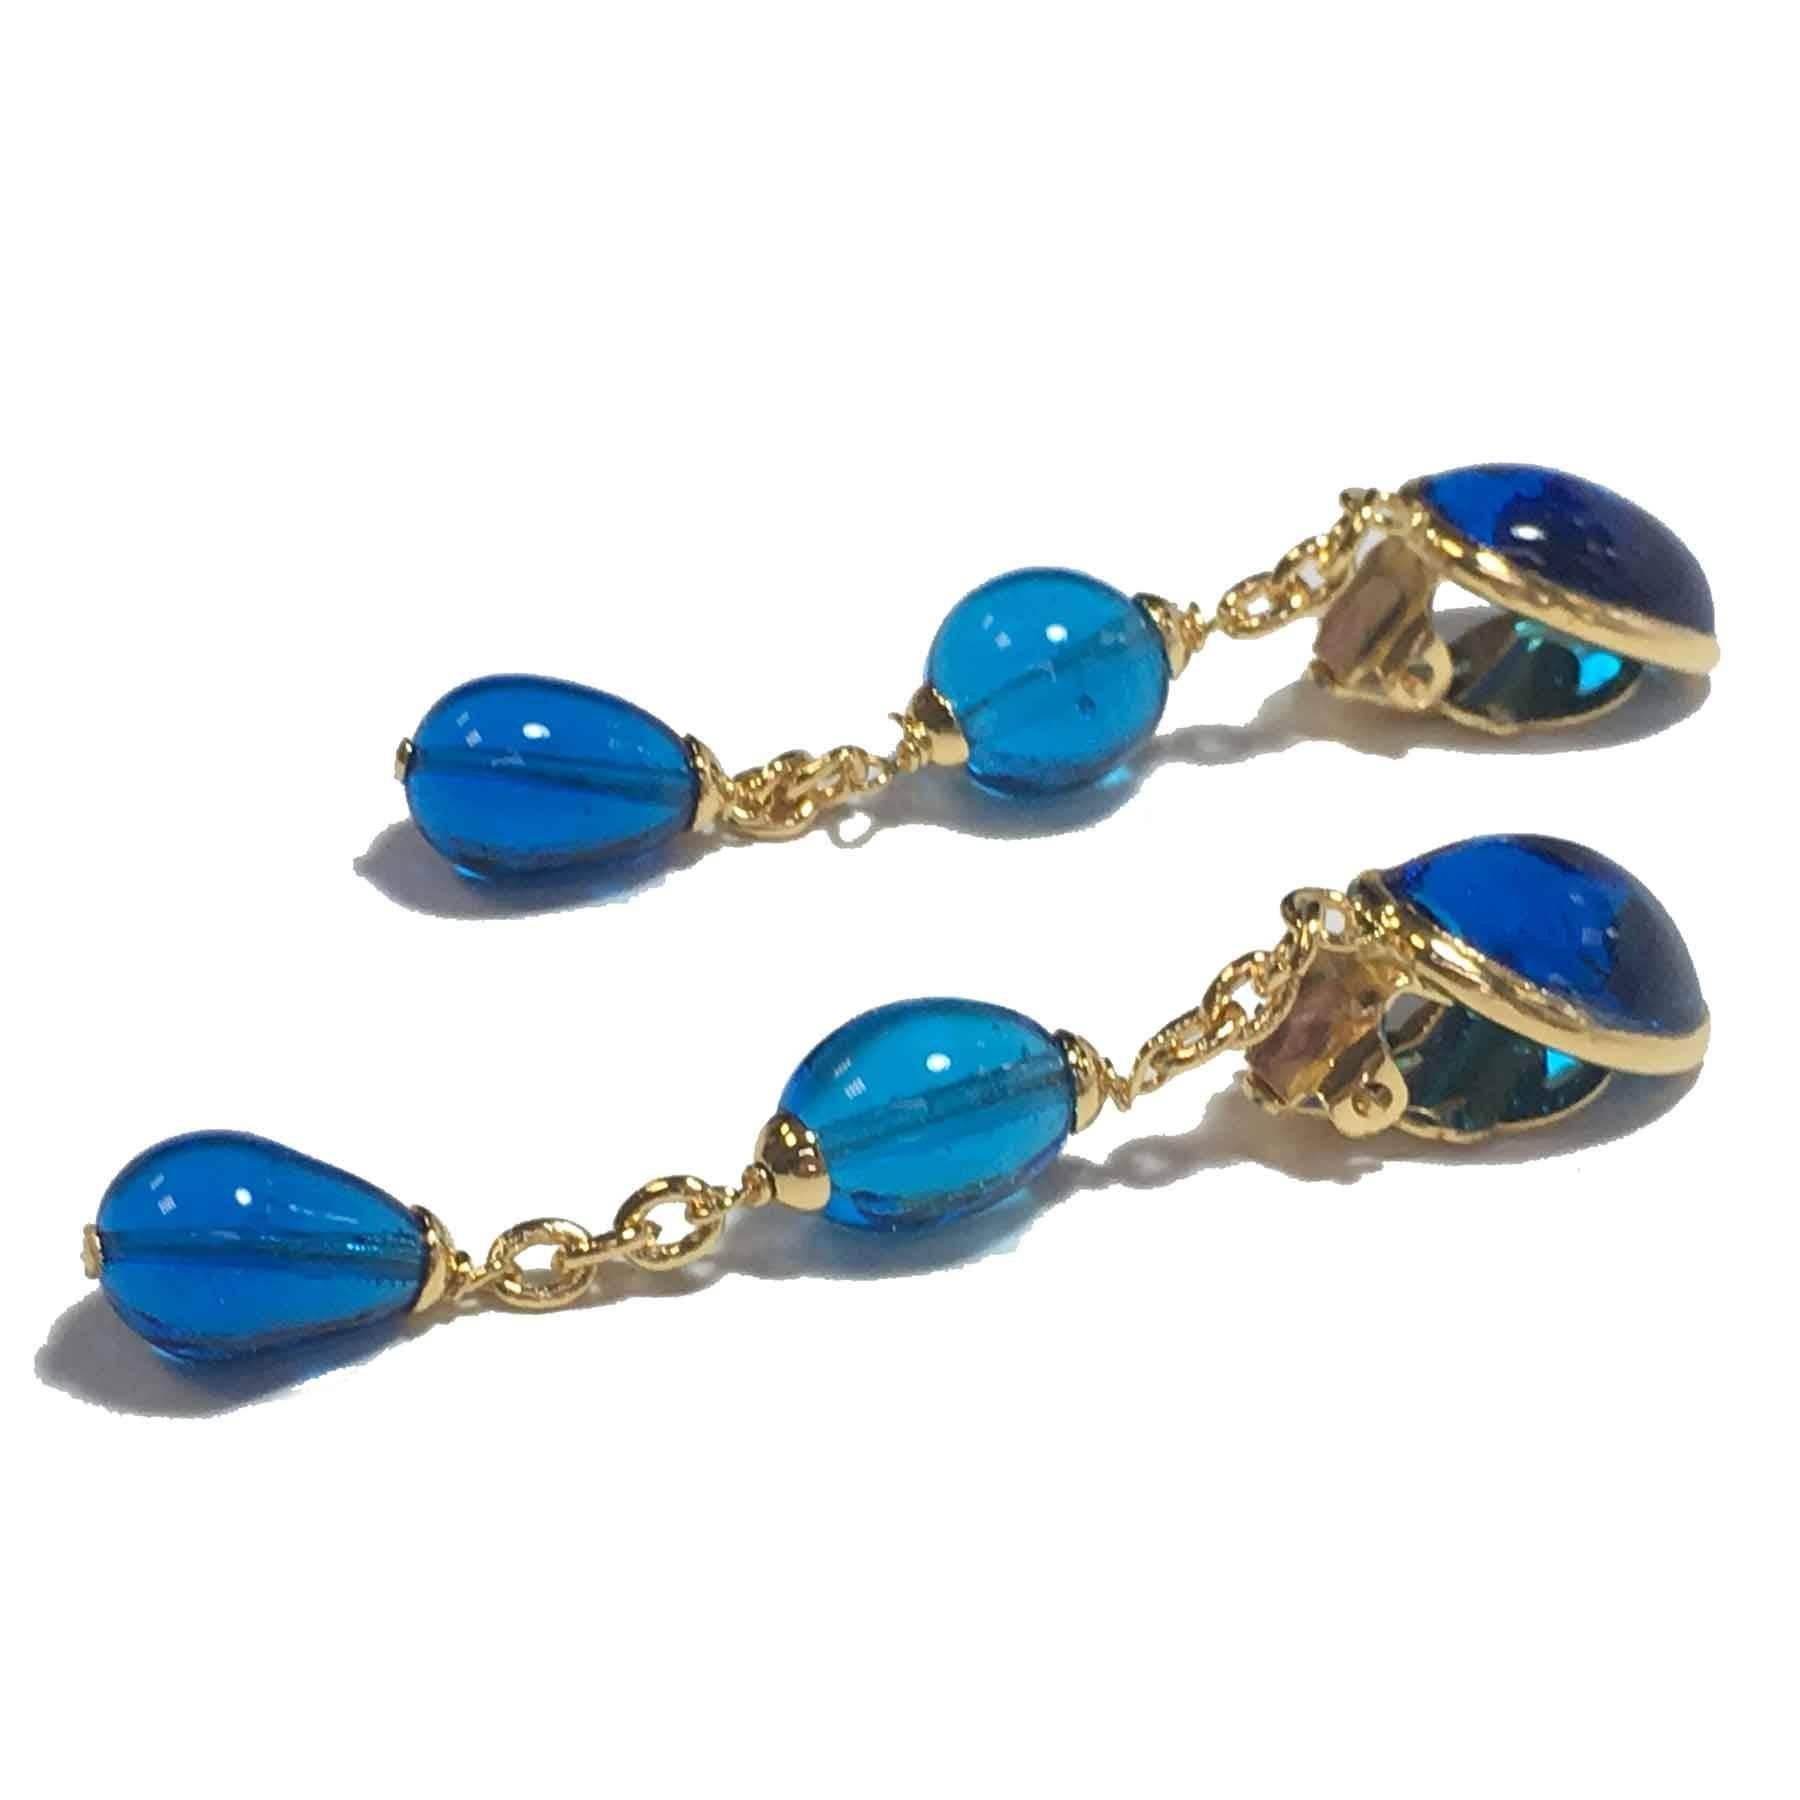 Very beautiful Marguerite de Valois pendant clip-on earrings in gold-plated metal with fine gold and blue molten glass.

The Maison Marguerite de Valois makes its jewelry in its Parisian workshops. It uses an ancestral technique for the creation of